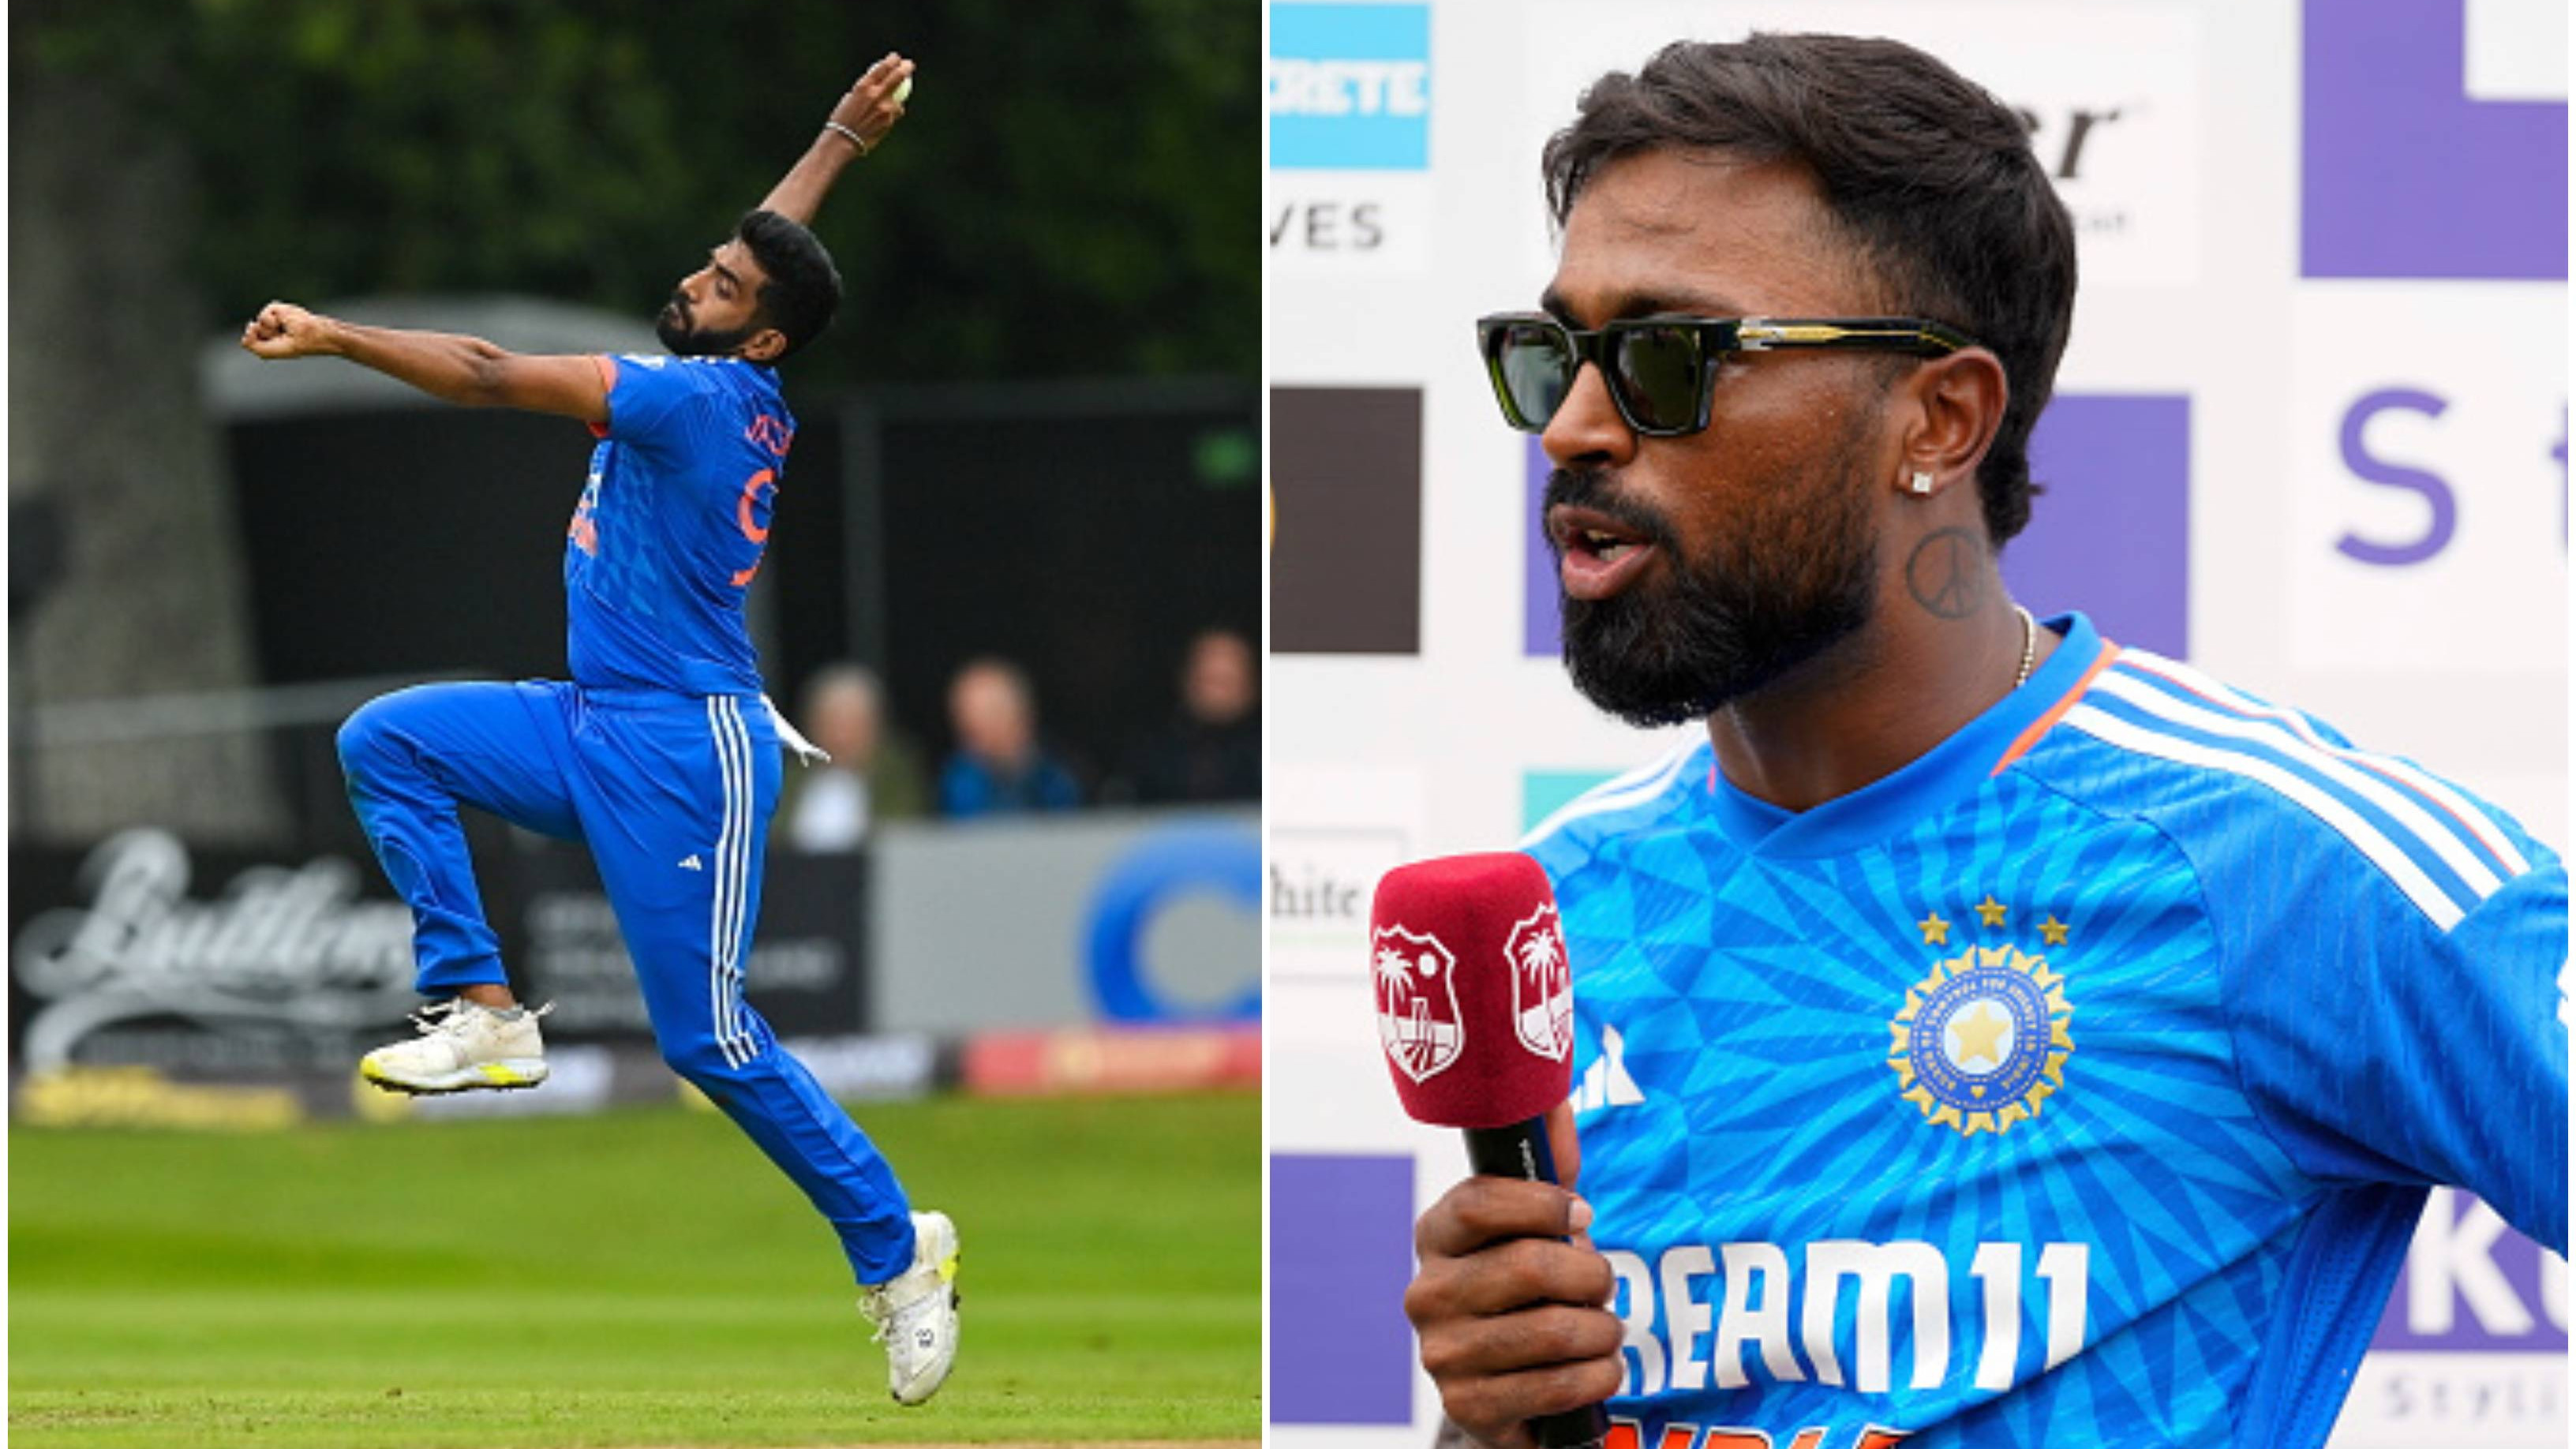 Jasprit Bumrah to give stiff competition to Hardik Pandya for ODI vice-captaincy: Report